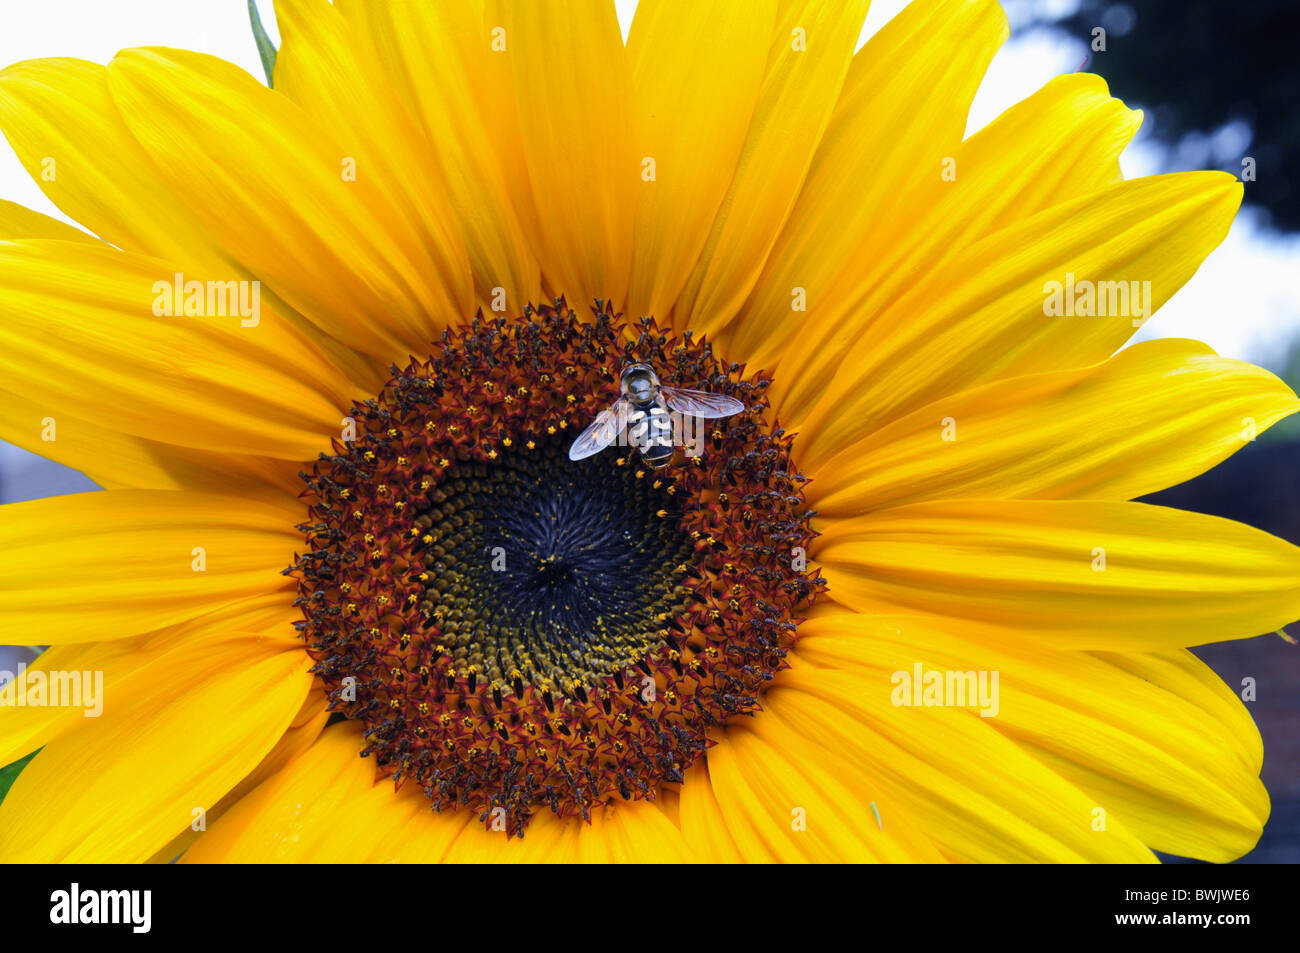 hoverfly visiting sunflower Stock Photo